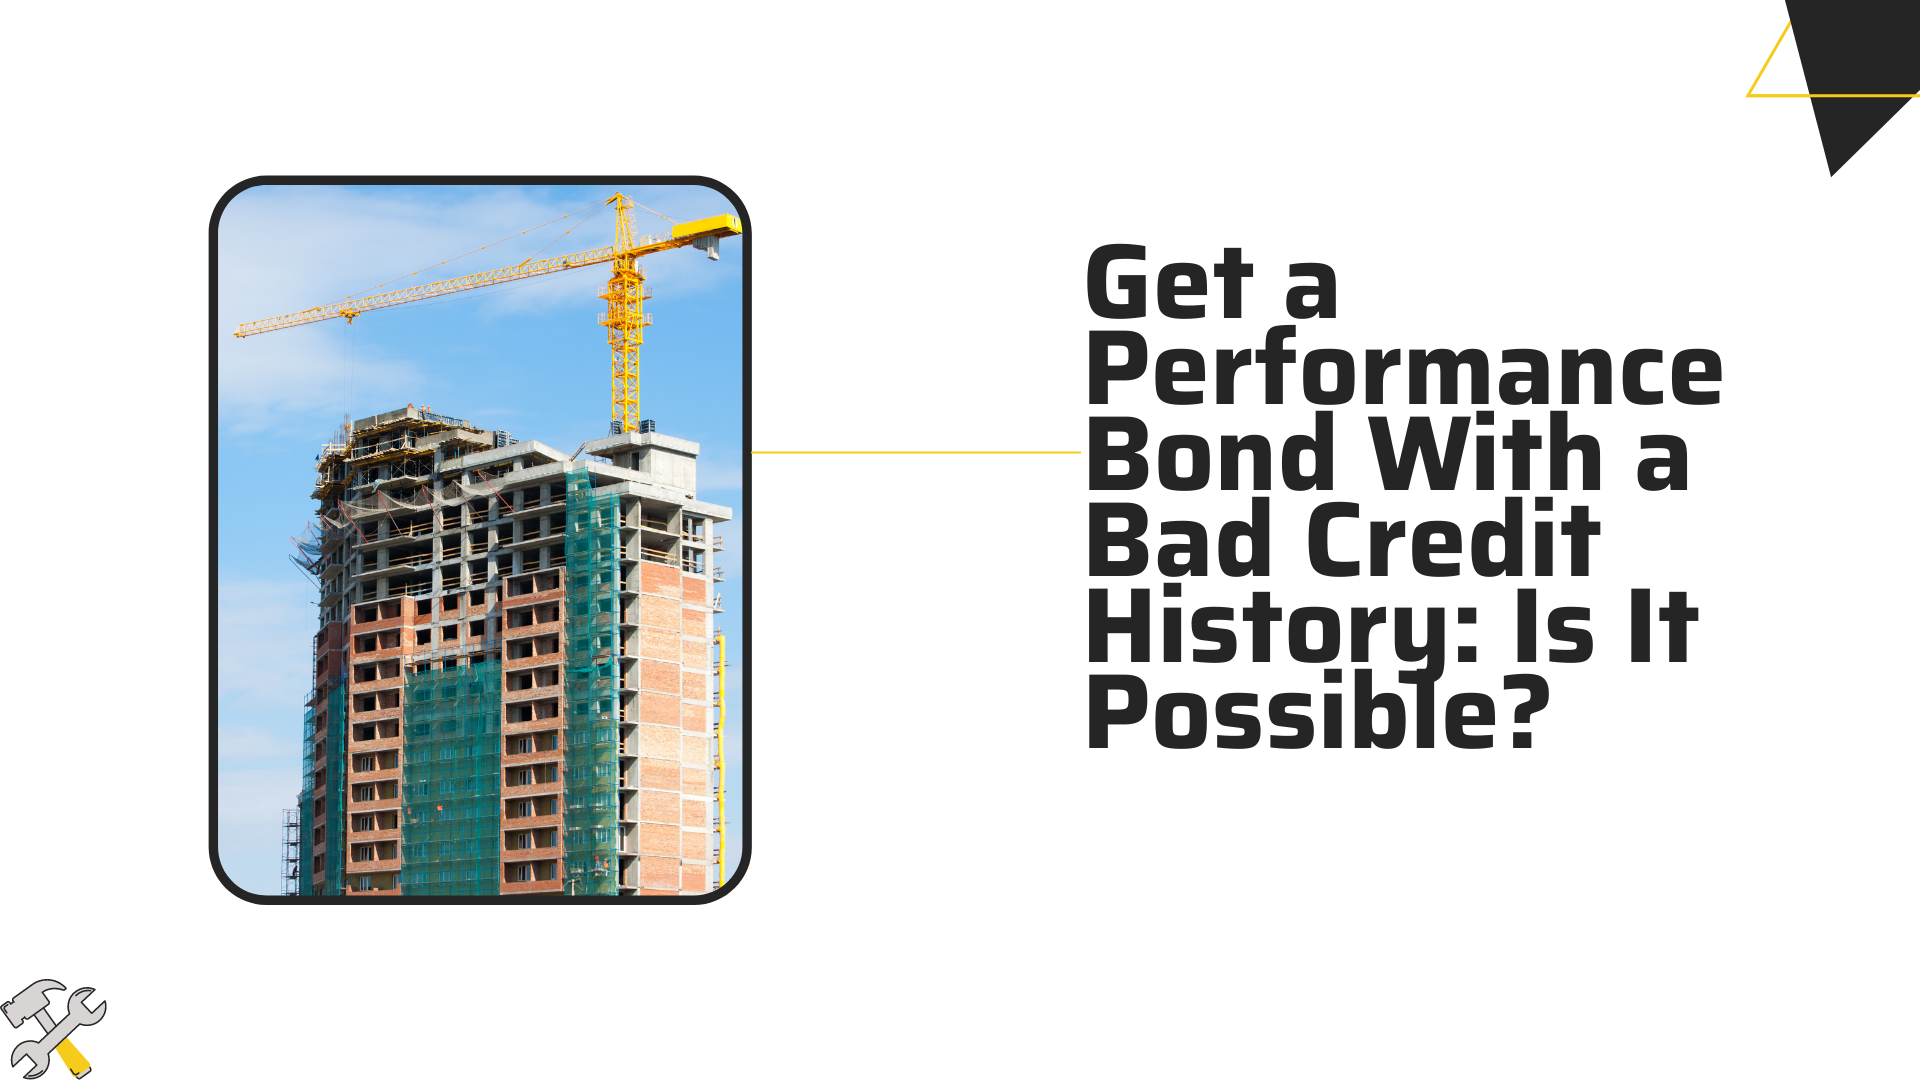 performance bond - Is it possible to get bonded if you have bad credit - image of a building in a phone